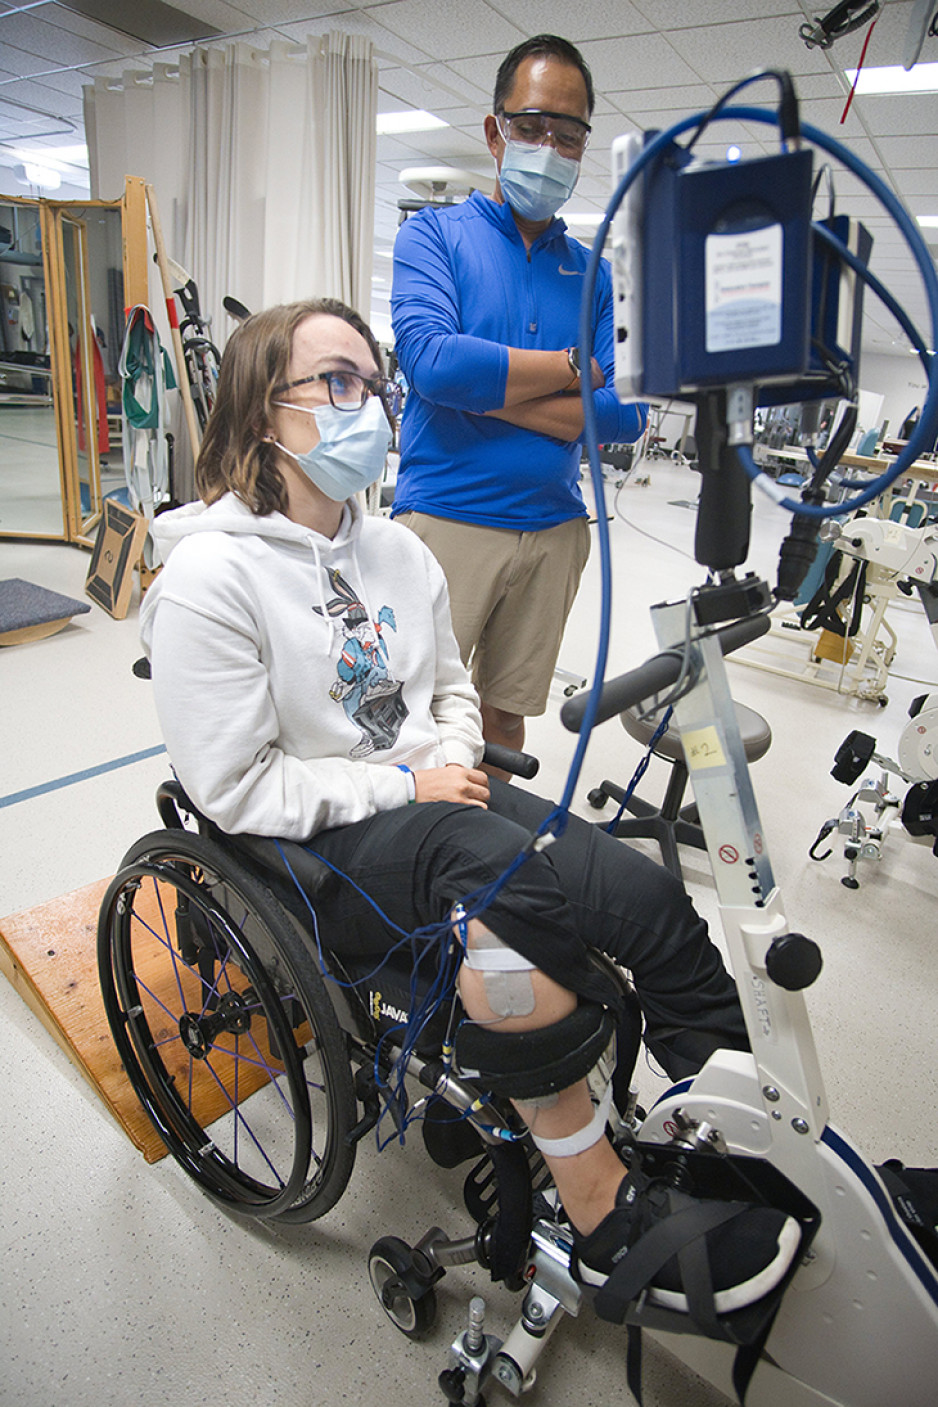 A masked woman in sweatpants and glasses in a wheelchair has her feet on the pedals of a modified exercise bike, which is connected to monitoring equipment. A masked man standing beside the equipment watches the woman